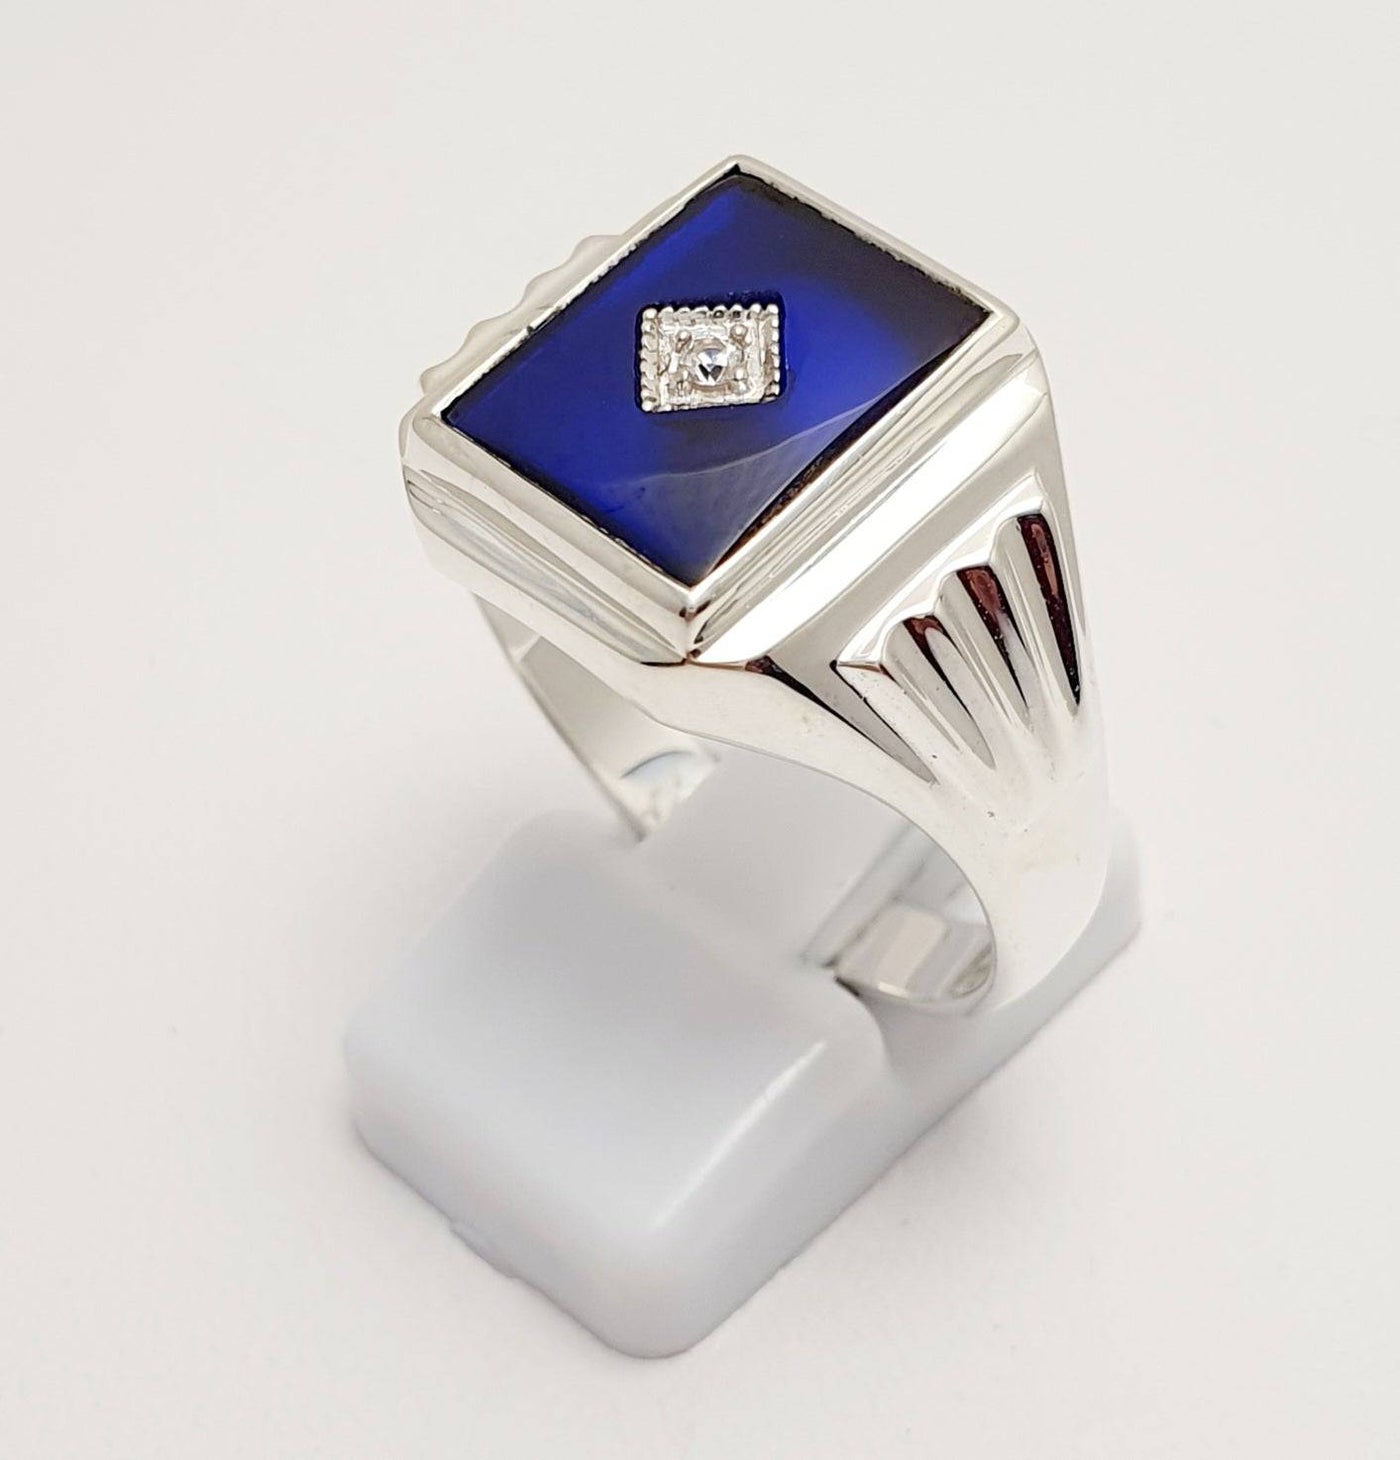 Sterling Silver Gents Ring With Created Sapphire And Cubic Zirconia. Rhodium Finish